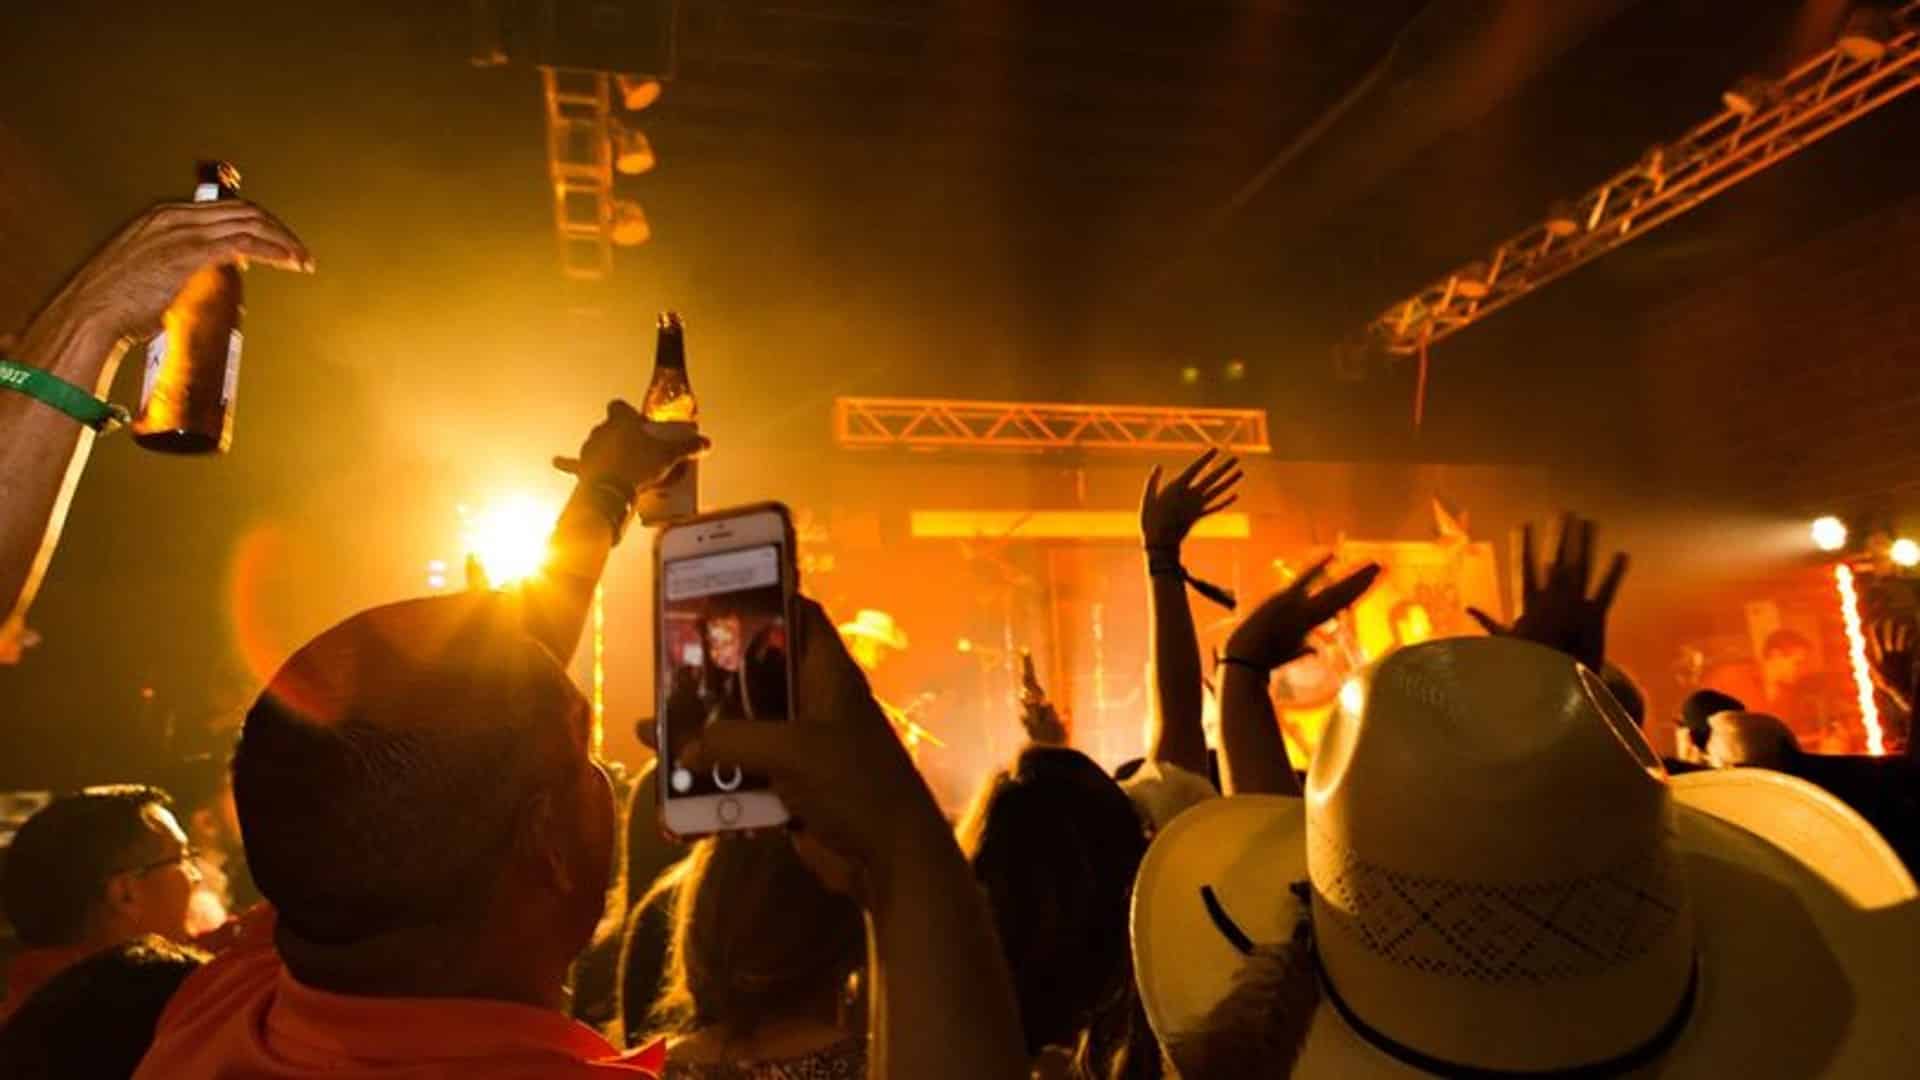 View of a crowd at night with hands raised by a stage with a band playing under golden lights